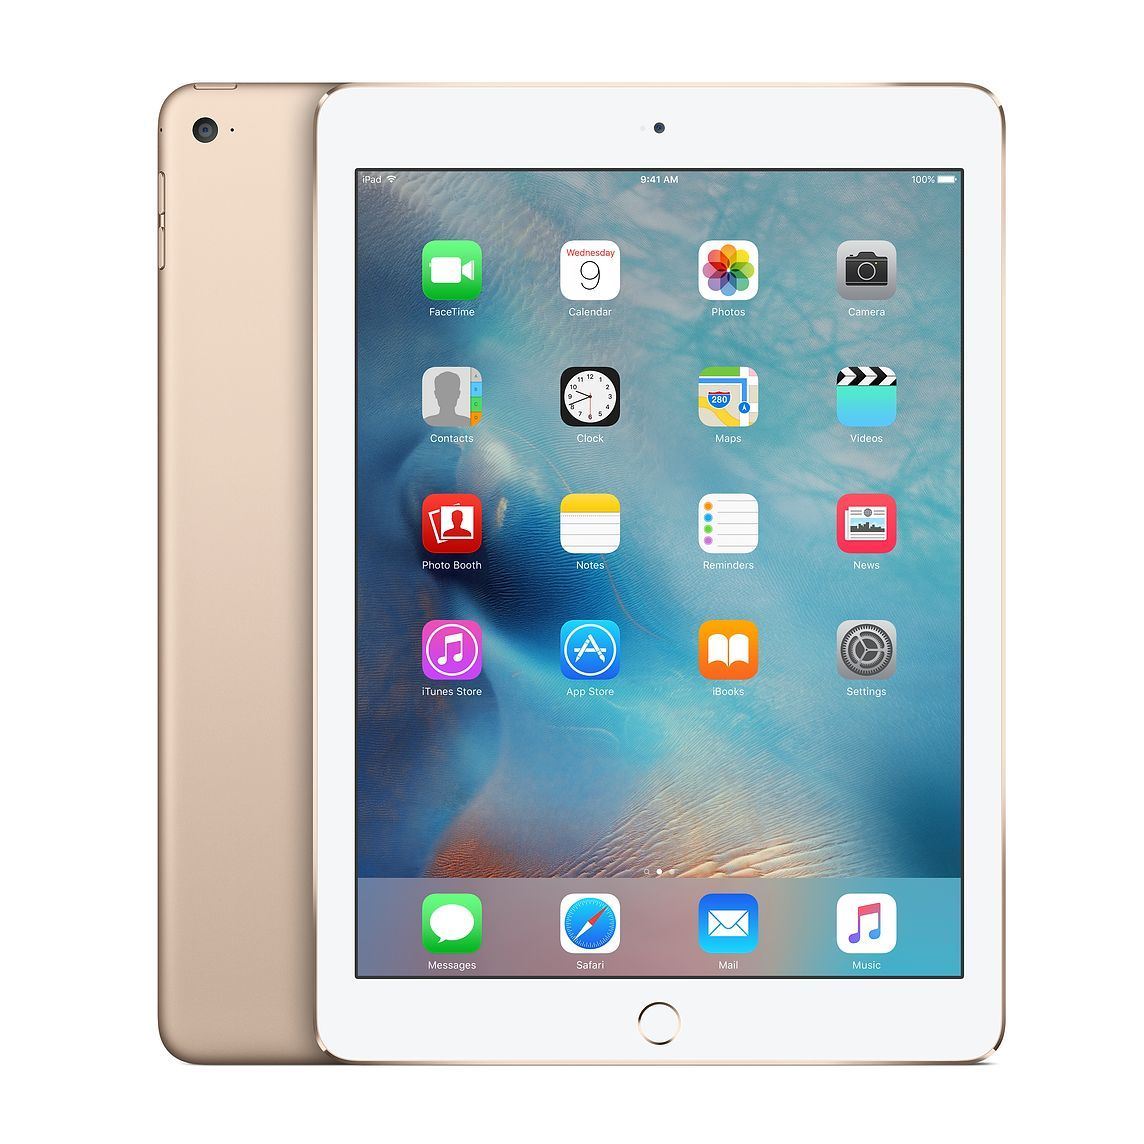 Apple iPad Air 2 32GB WiFi Gold Refurbished Excellent